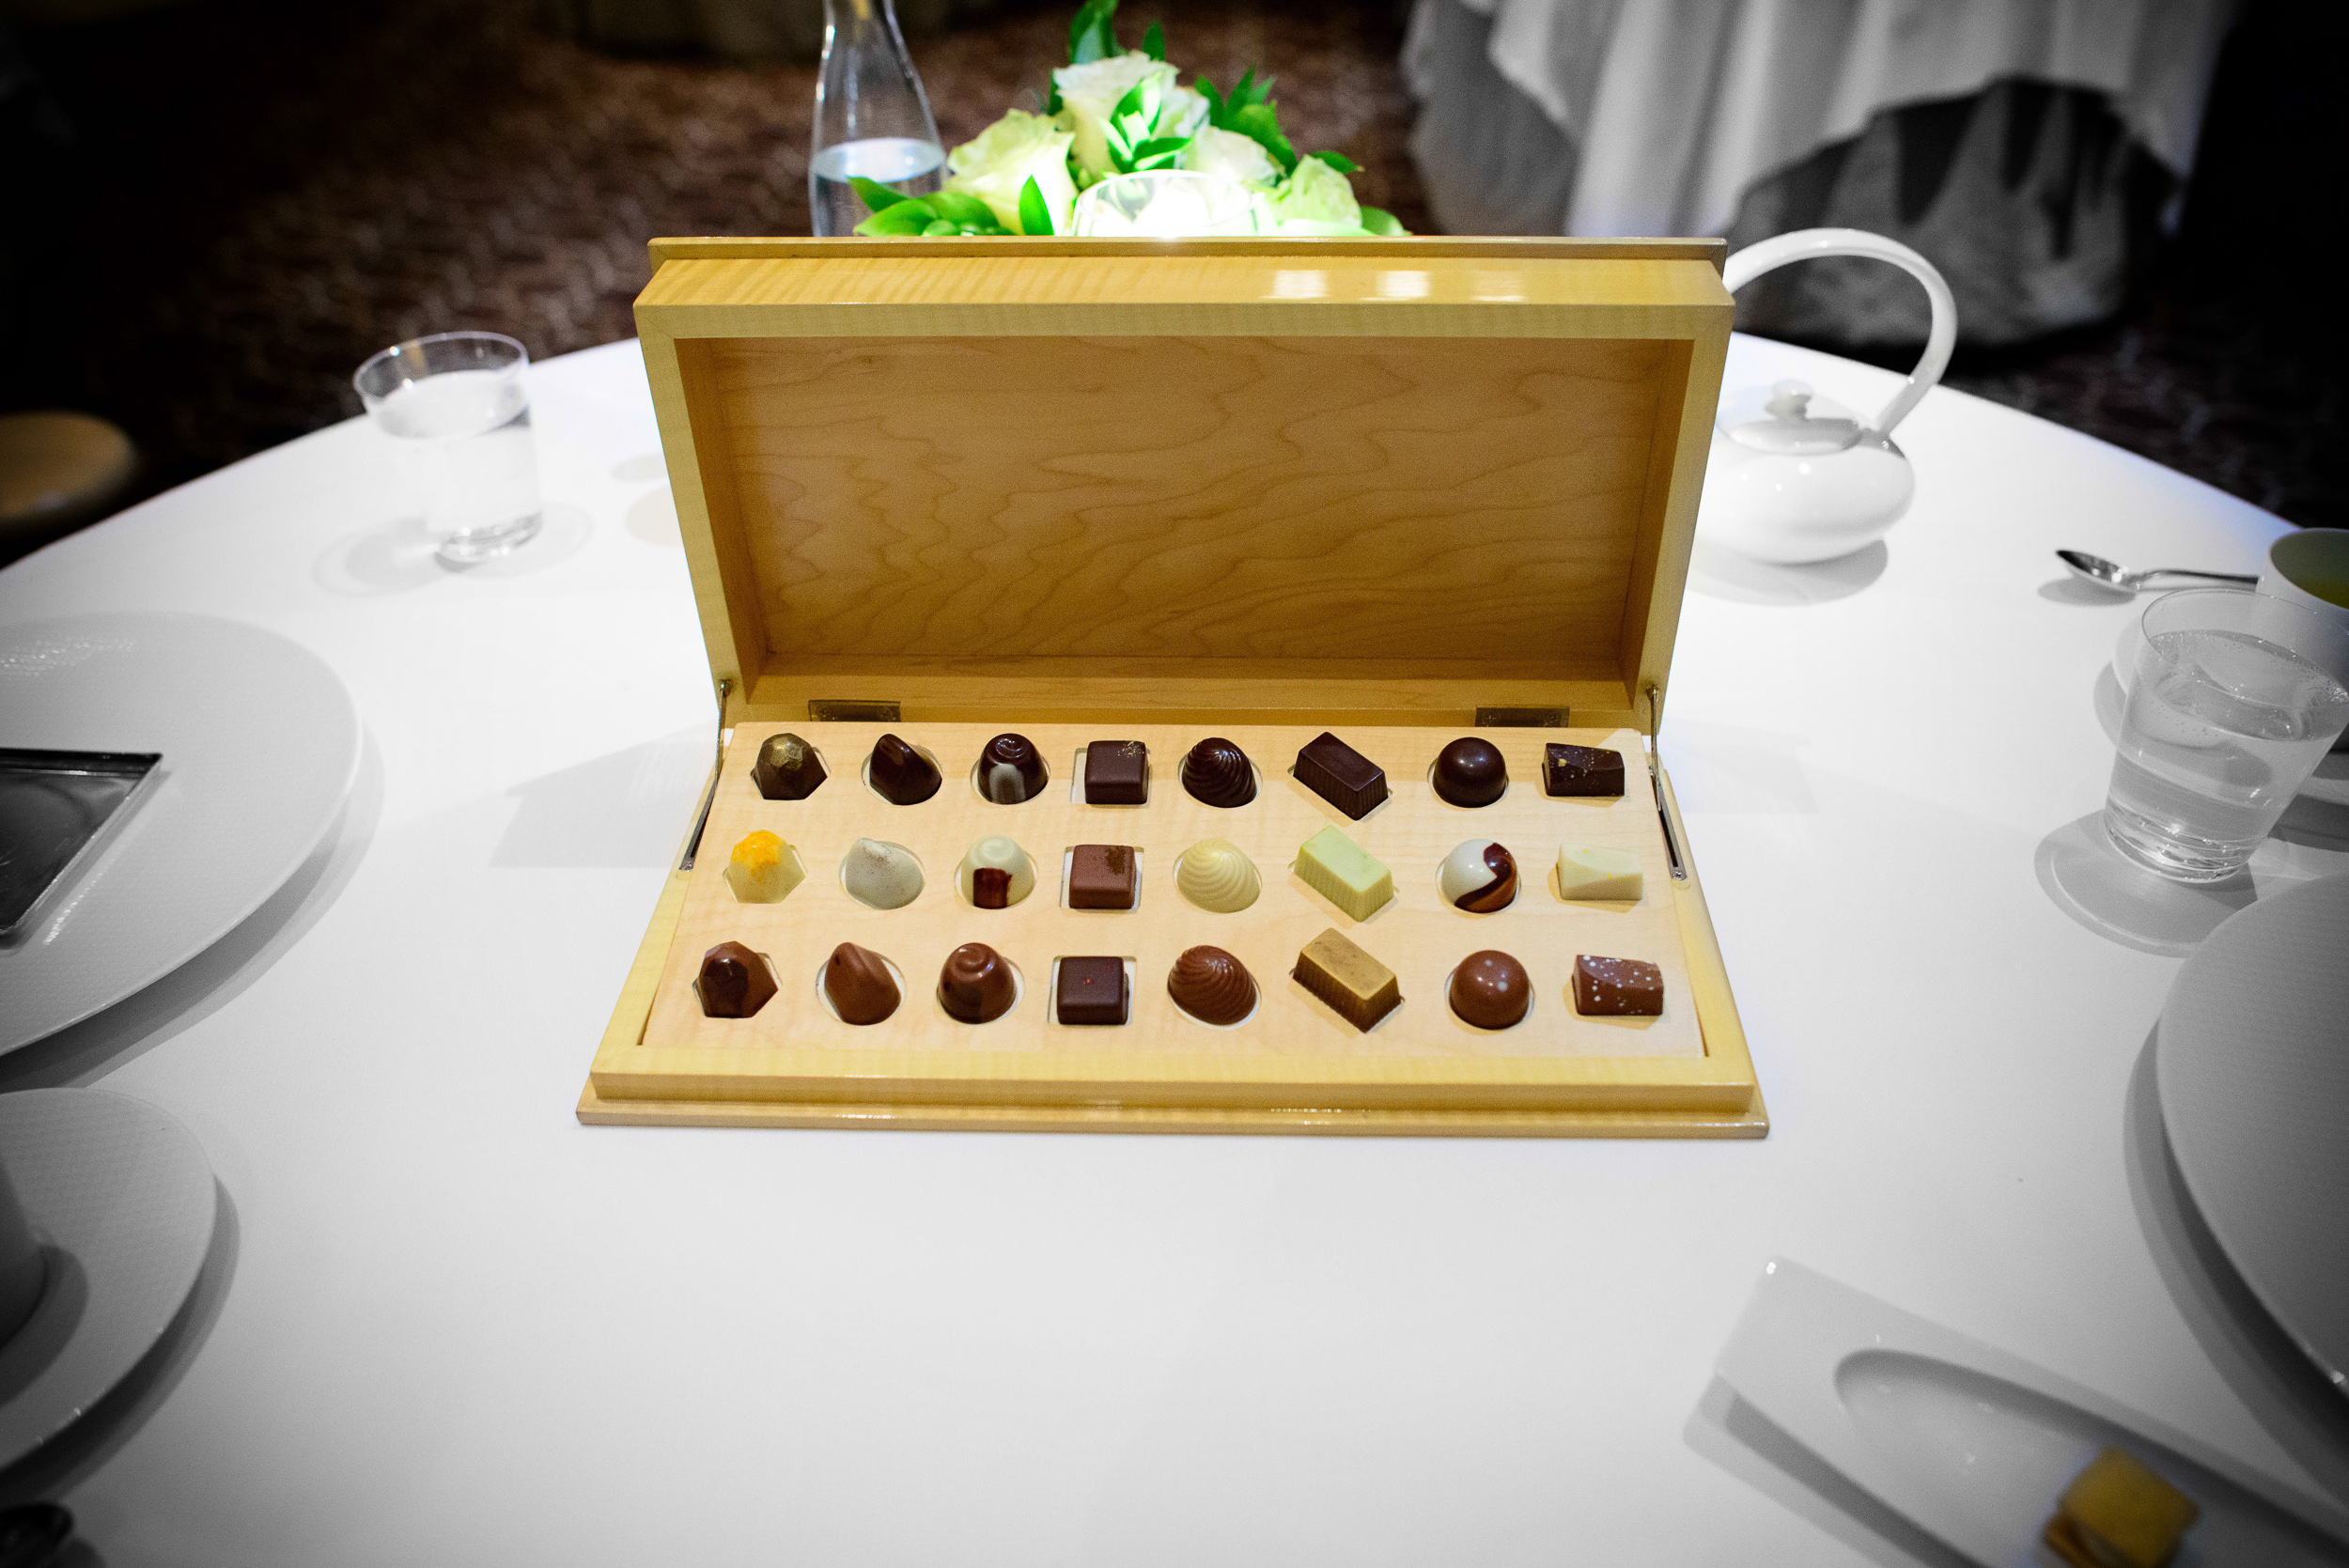 21st Course: The chocolate box